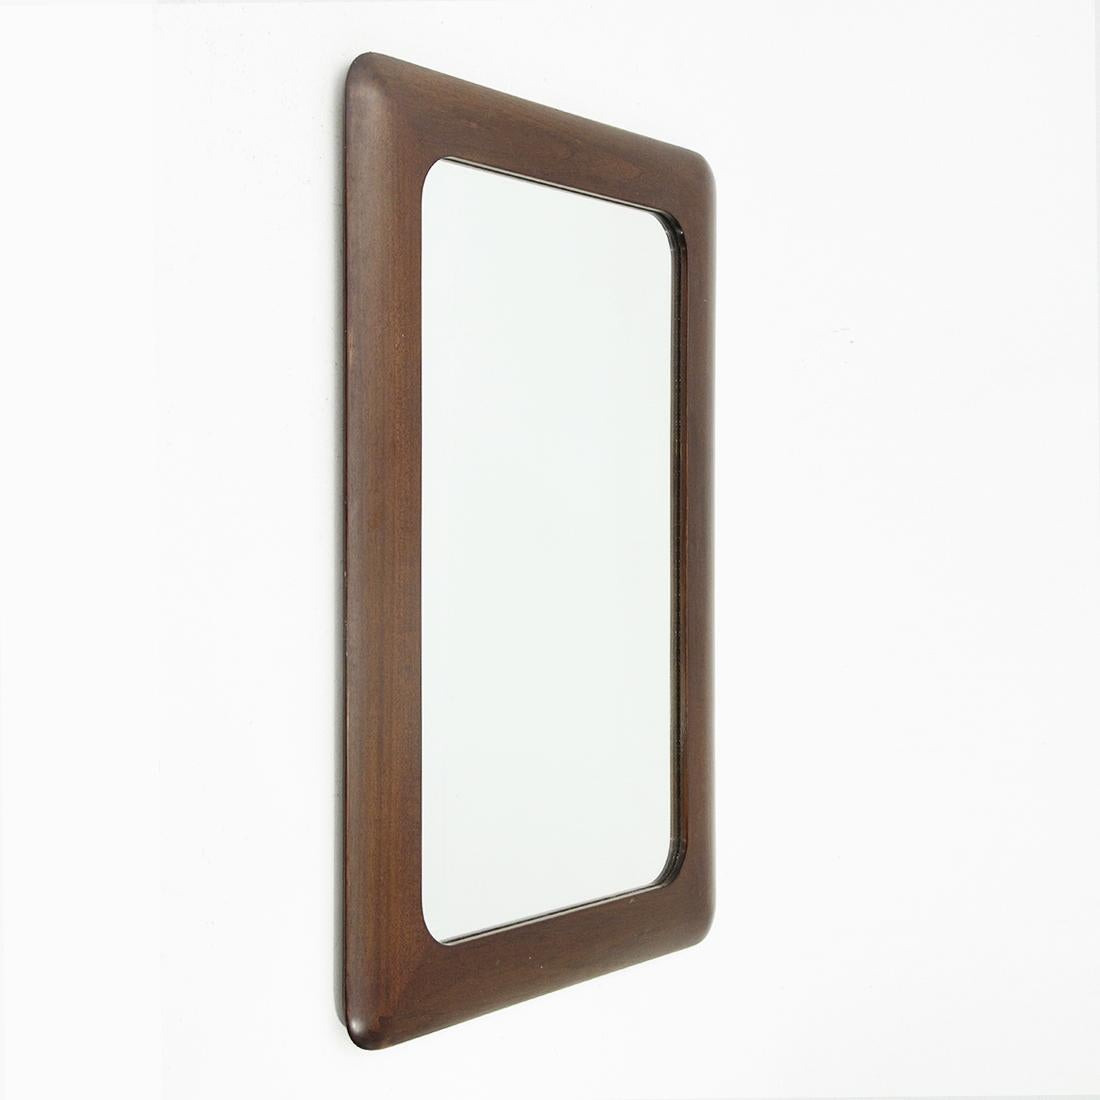 German manufactured mirror produced in the 1970s.
Rectangular shaped wooden frame with rounded corners.
Structure in good condition, some signs due to normal use over time.

Dimensions: Length 70 cm, depth 4 cm, height 105 cm.